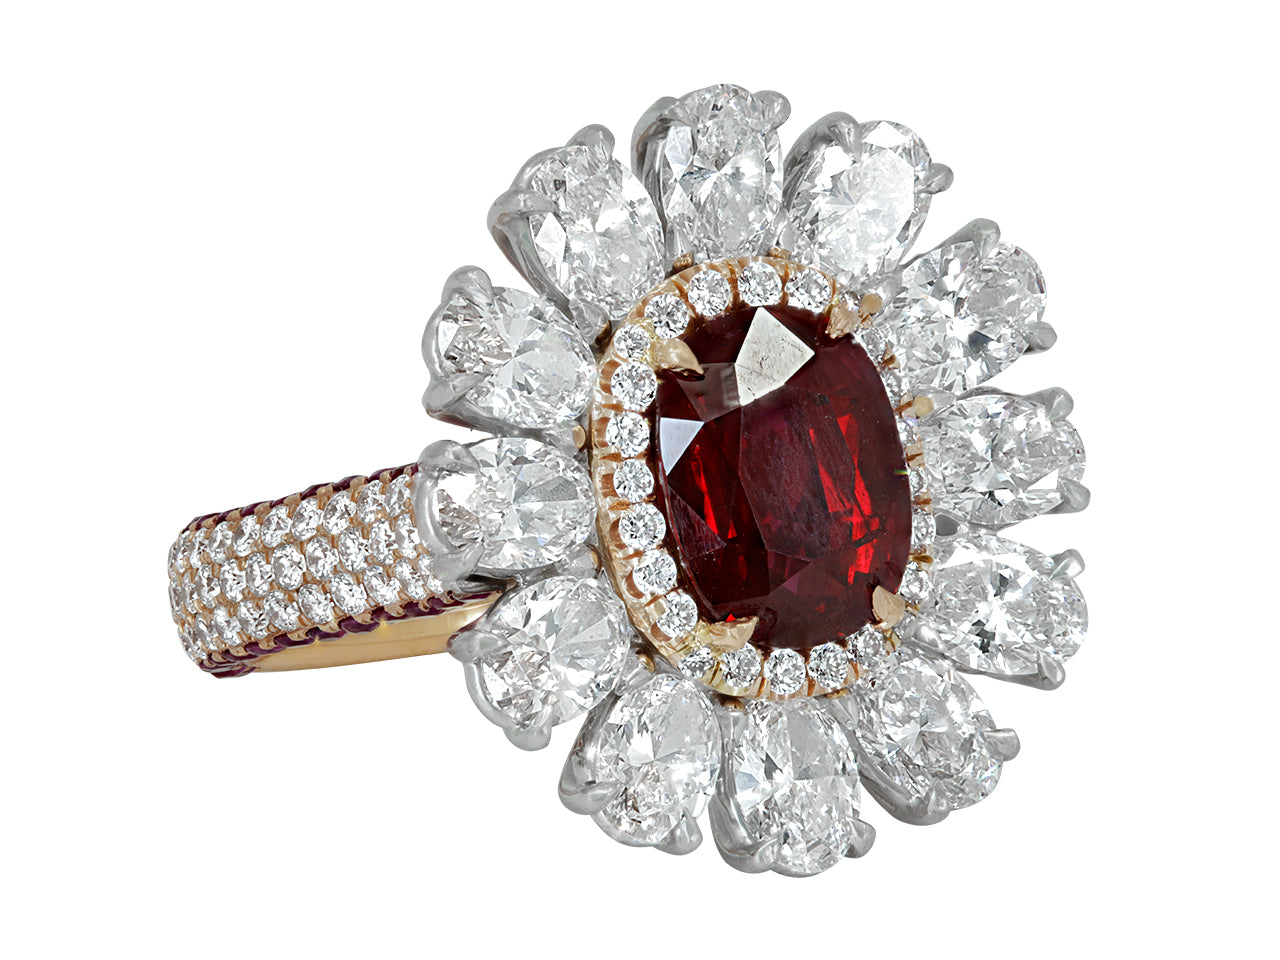 Natural Thai Ruby, 2.13 Carat, and Diamond Floral Ring in 18K